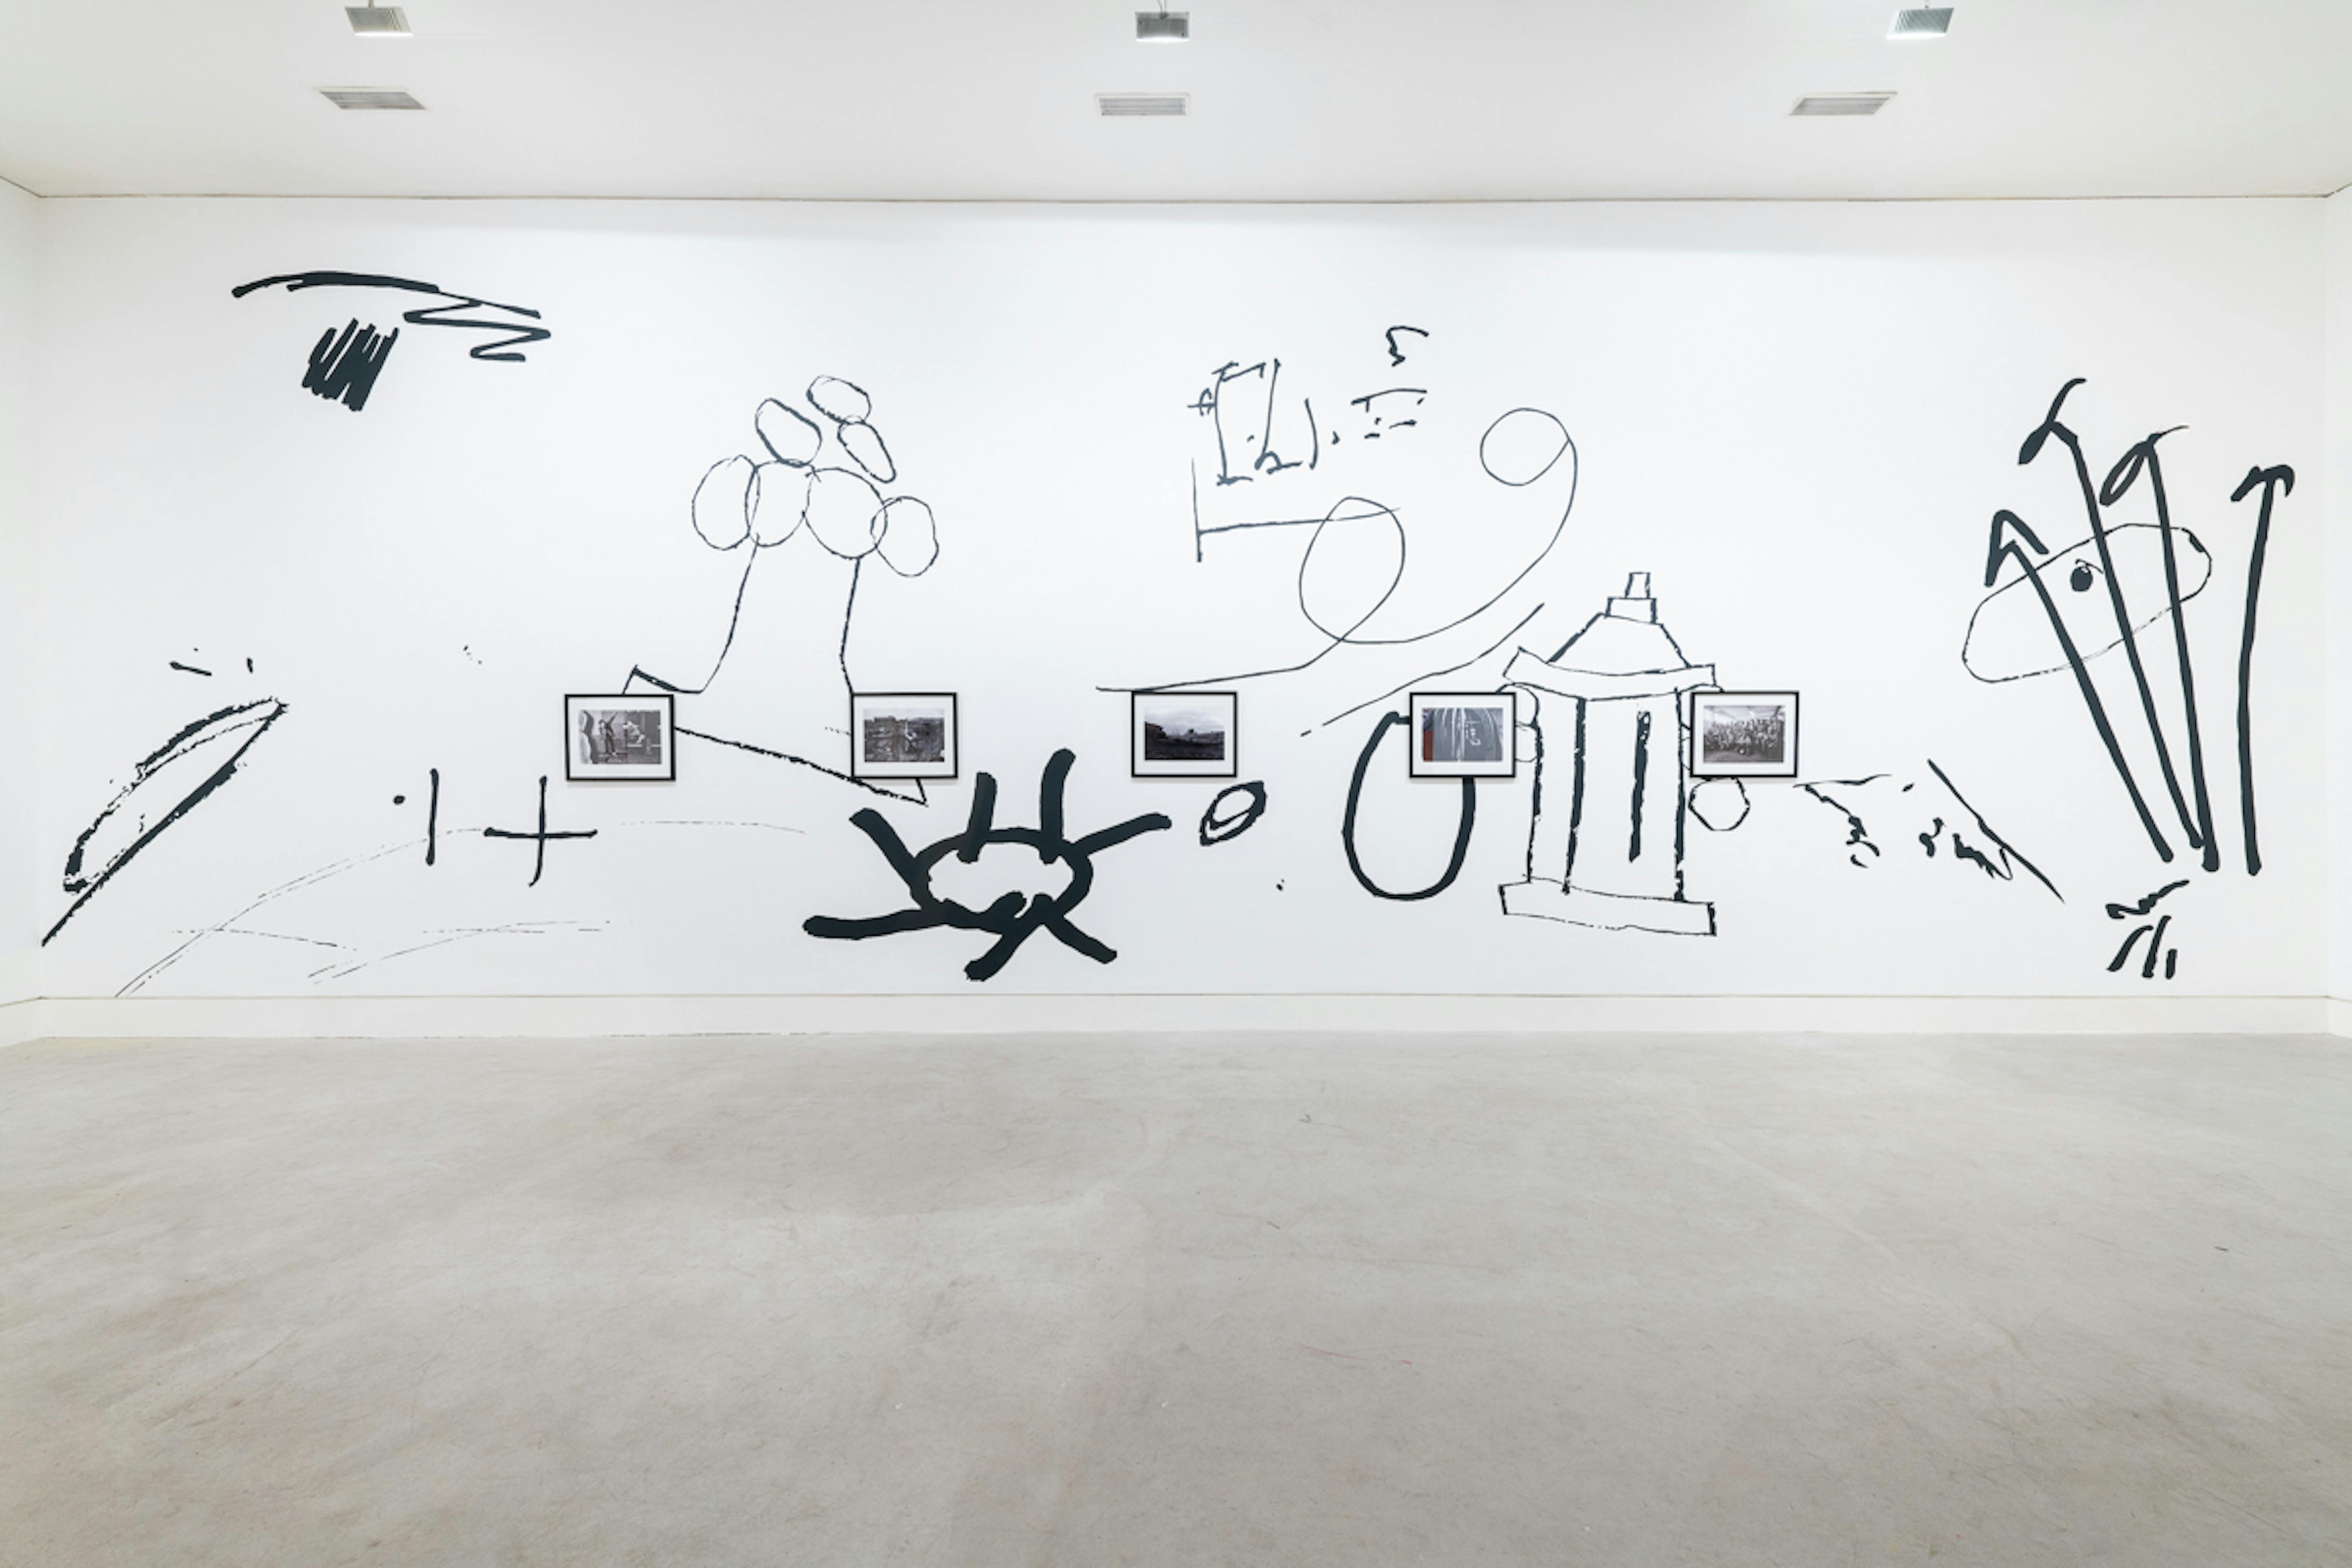 A large scale black and white wall drawing of oversized doodles frames a series of small documentary photographs depicting everyday life in the North-East of England. 